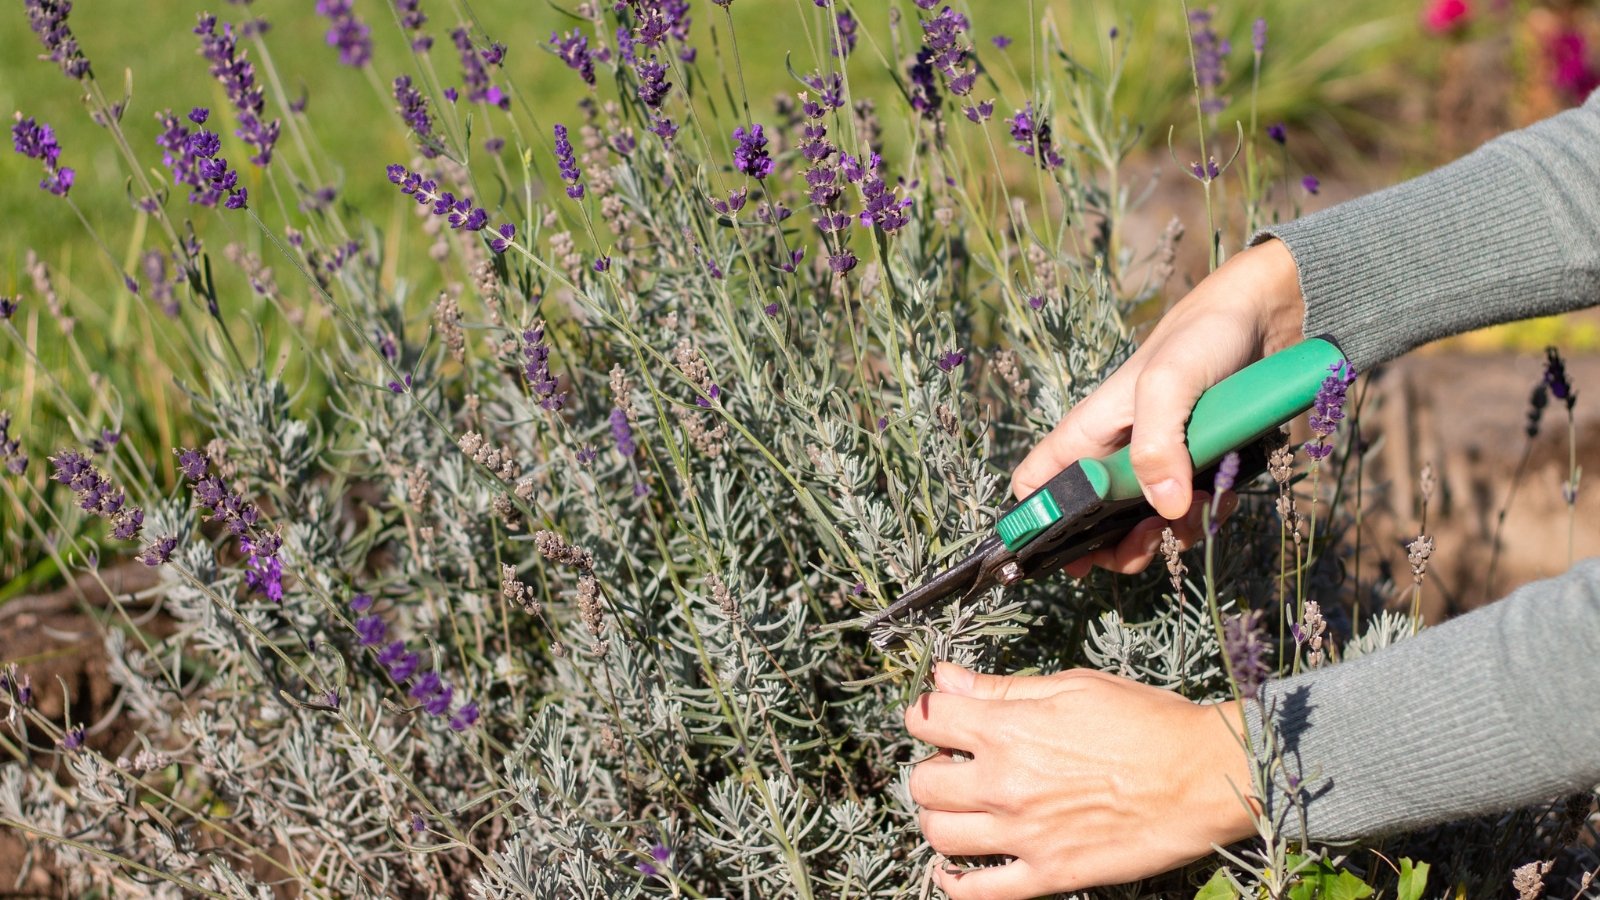 Pruning Lavender with Garden Shears